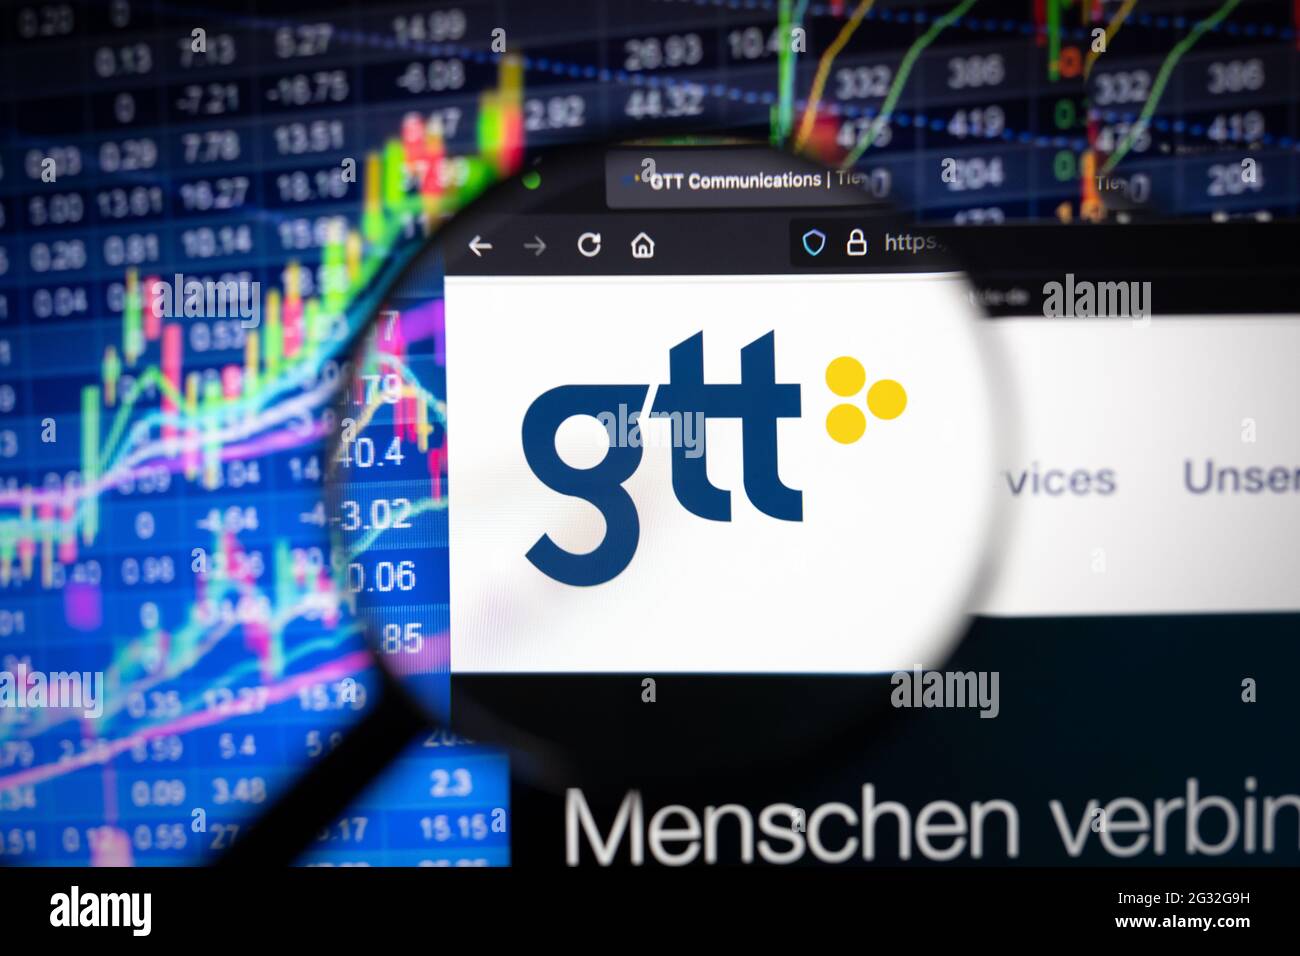 GTT company logo on a website with blurry stock market developments in the background, seen on a computer screen through a magnifying glass Stock Photo